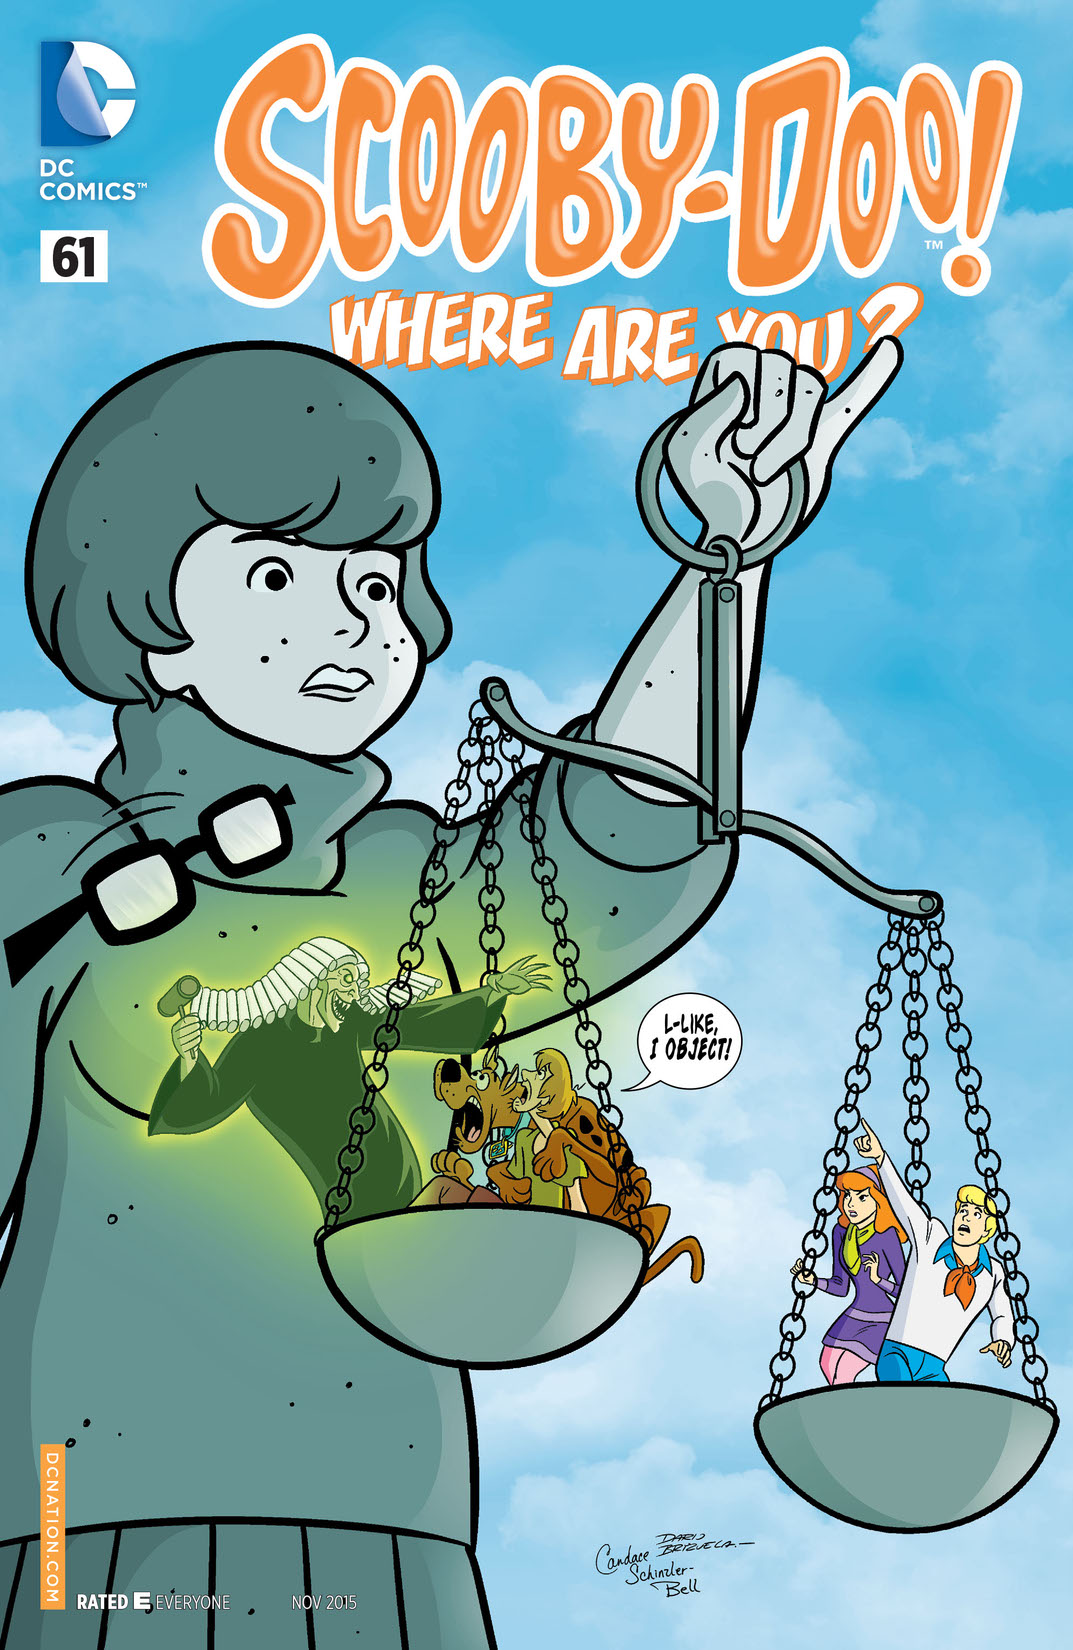 Scooby-Doo, Where Are You? #61 preview images